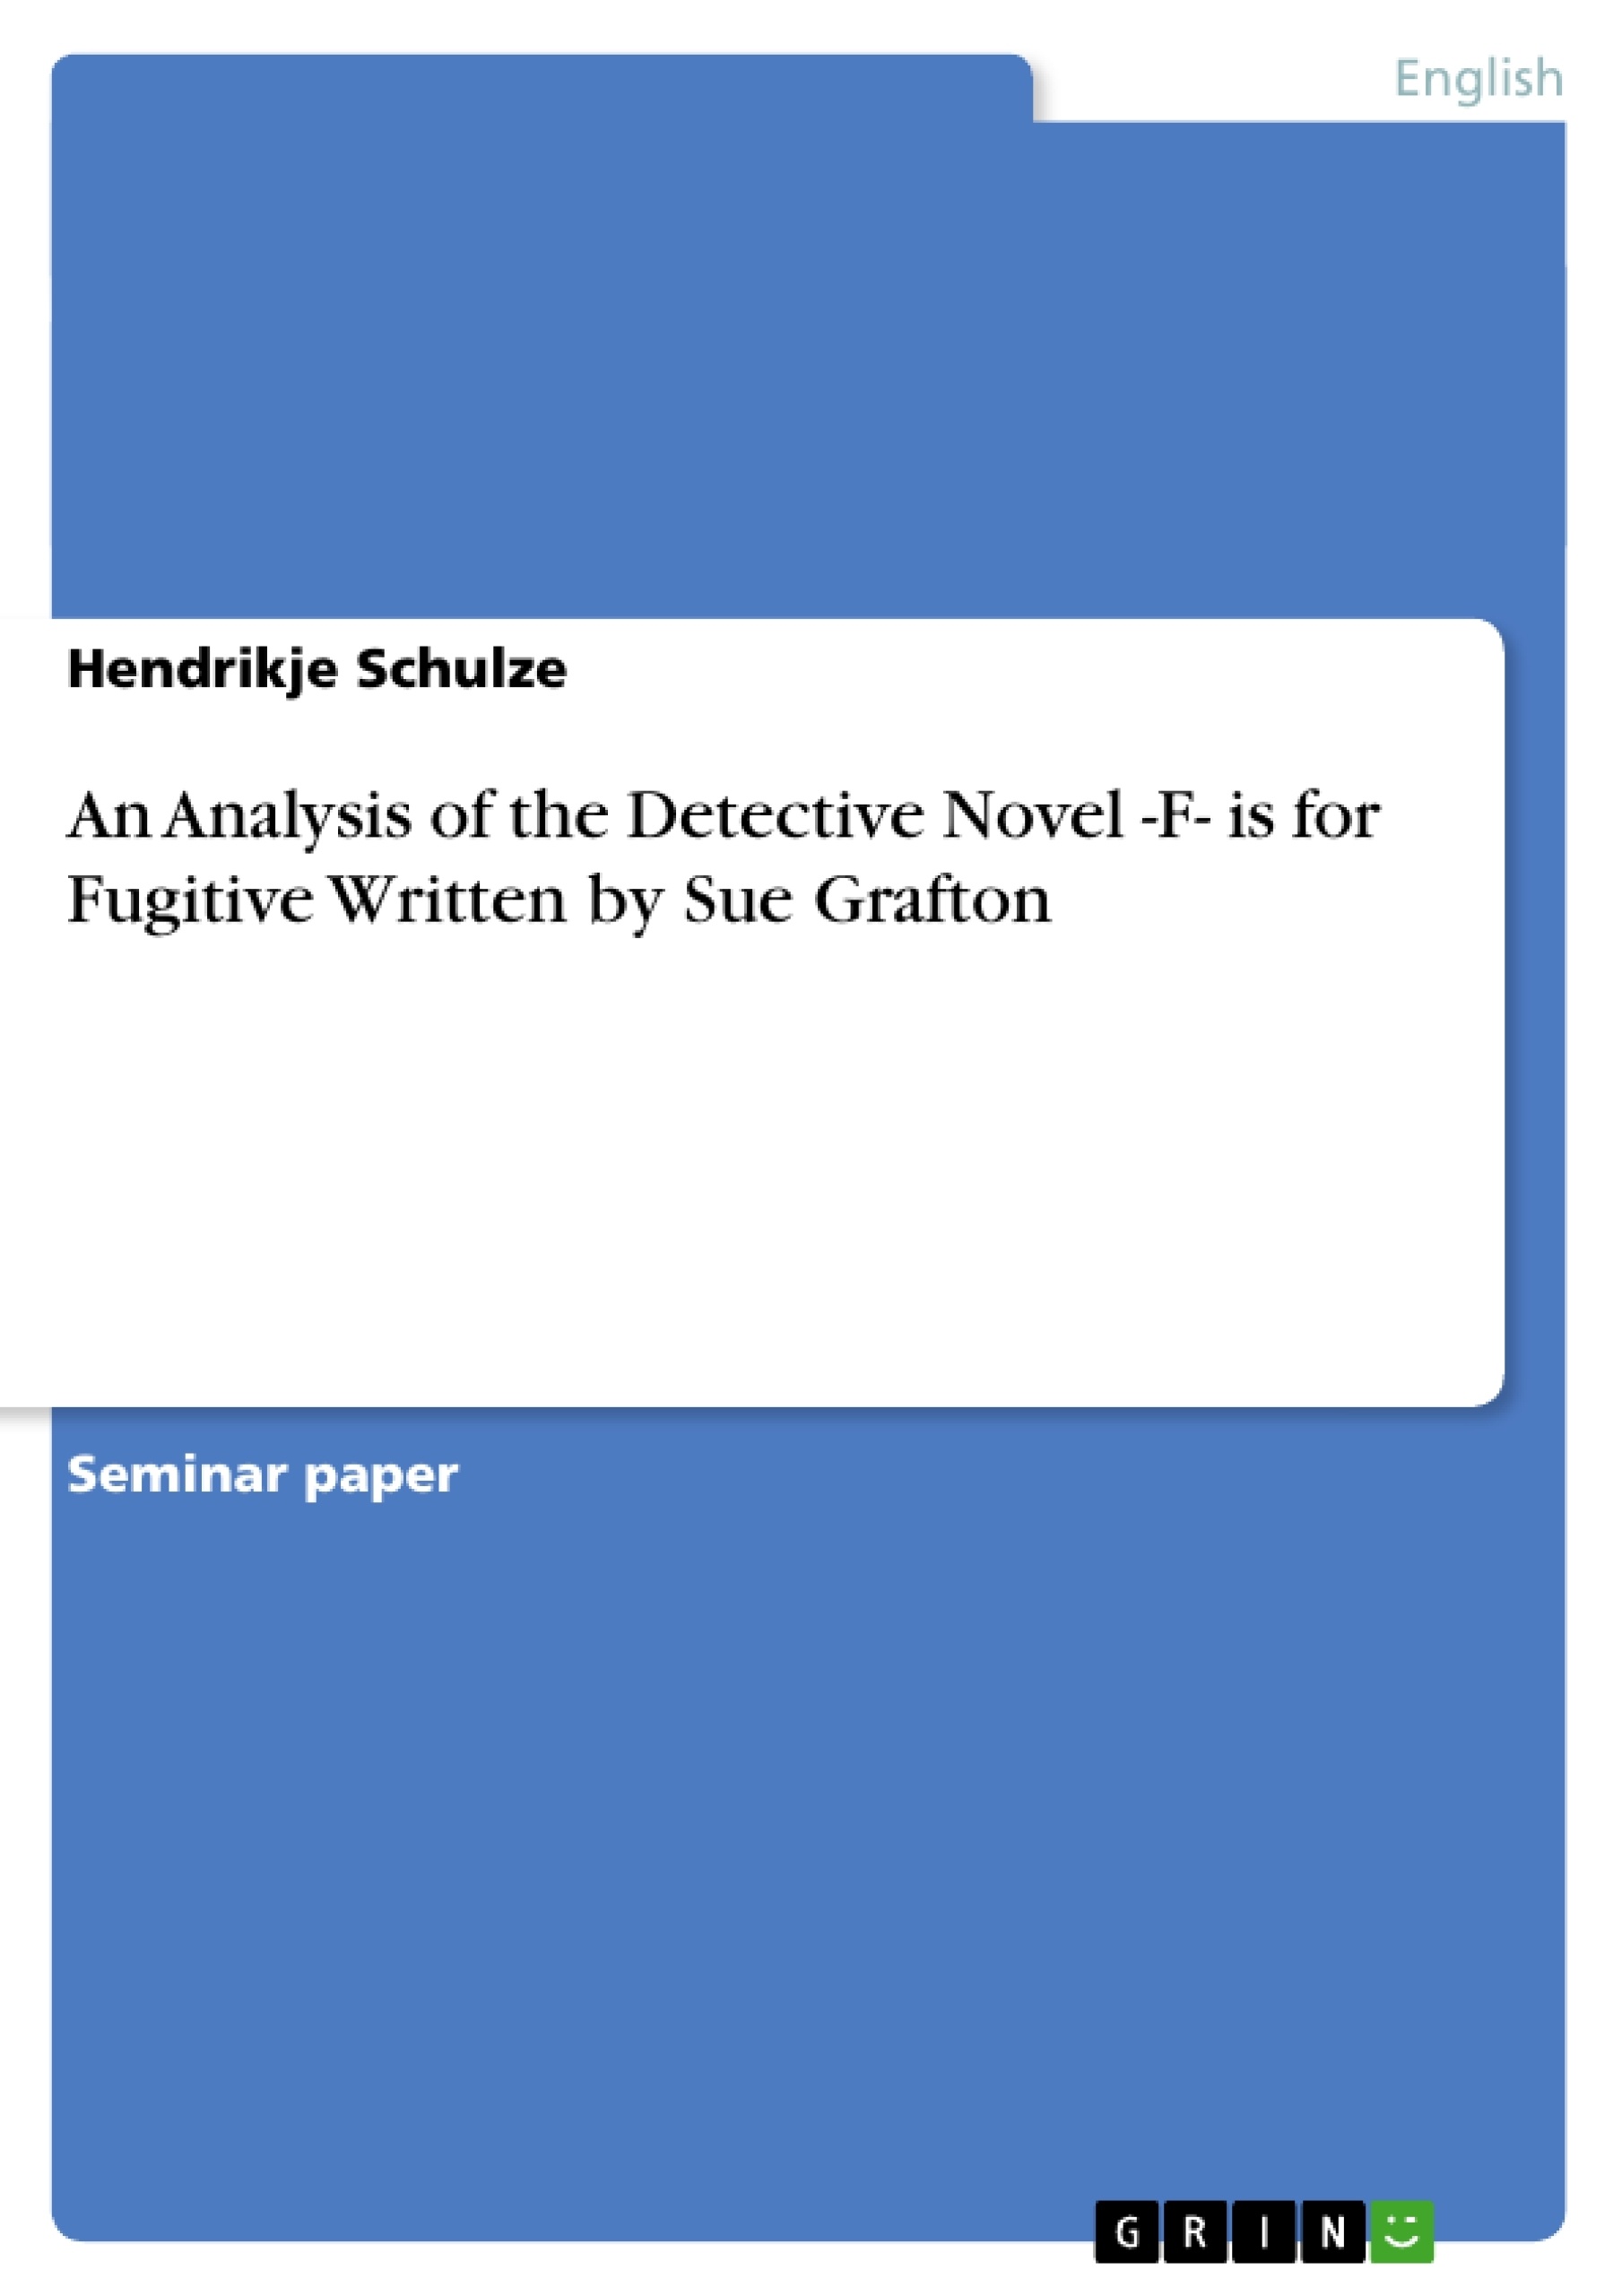 Titre: An Analysis of the Detective Novel -F- is for Fugitive Written by Sue Grafton